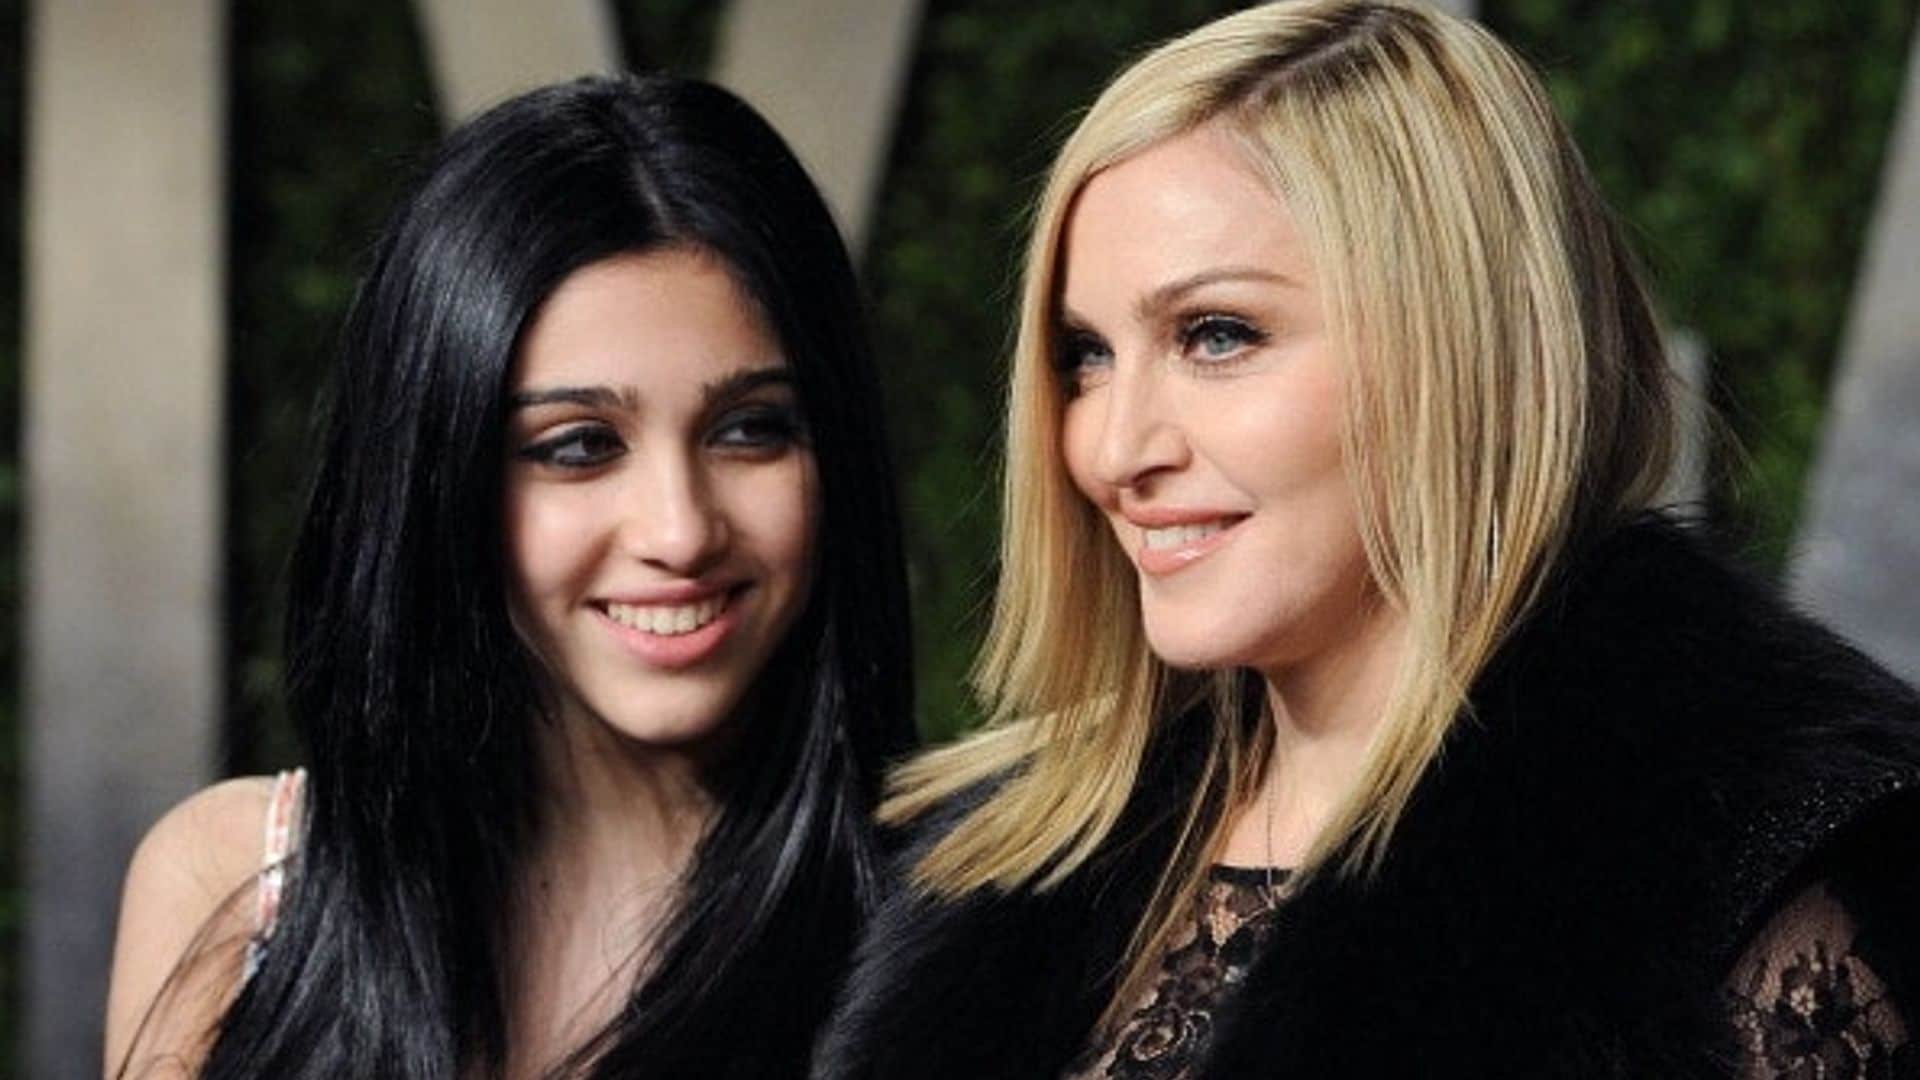 Madonna's "Lucky Star": Daughter Lourdes shows edgy style on Instagram